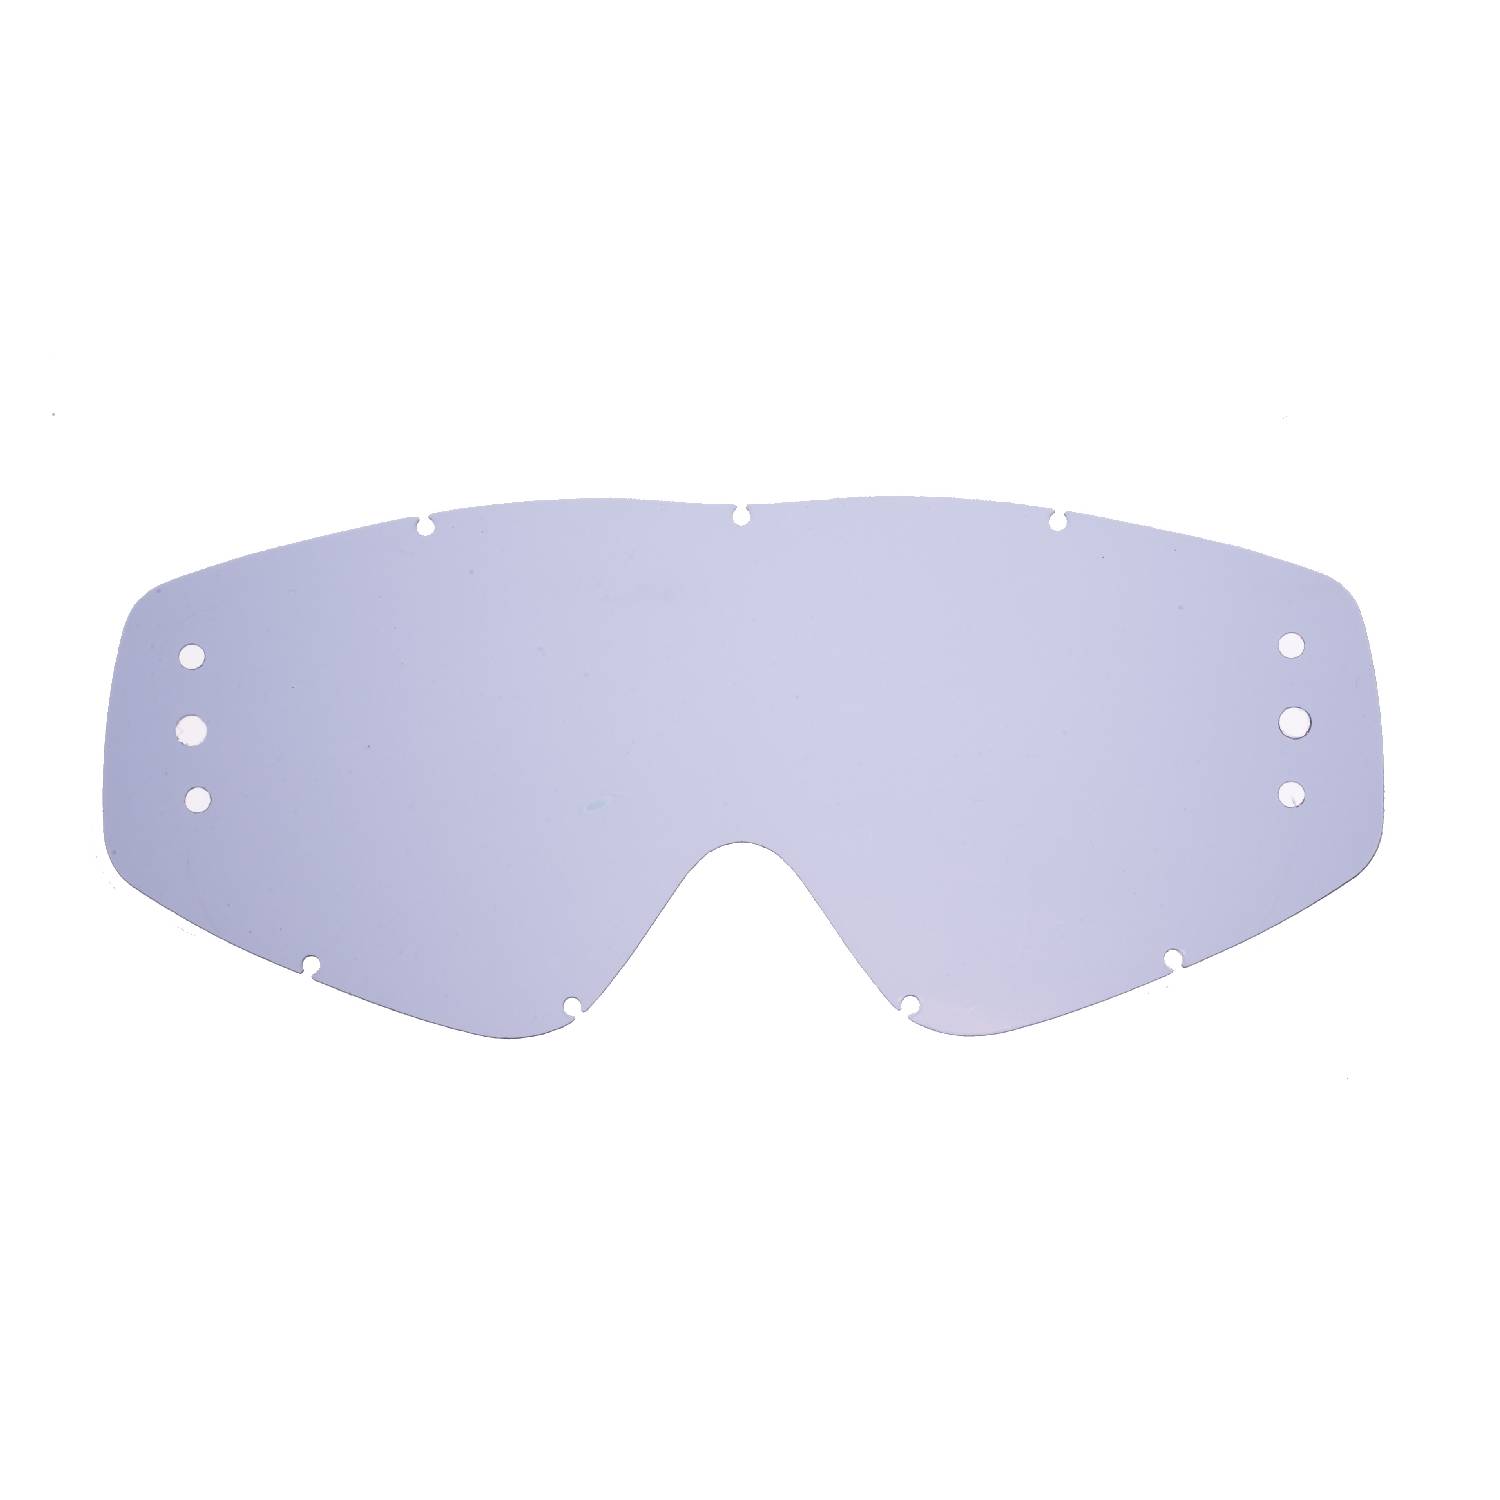 roll off lenses with smokey lenses compatible for Eks goggle